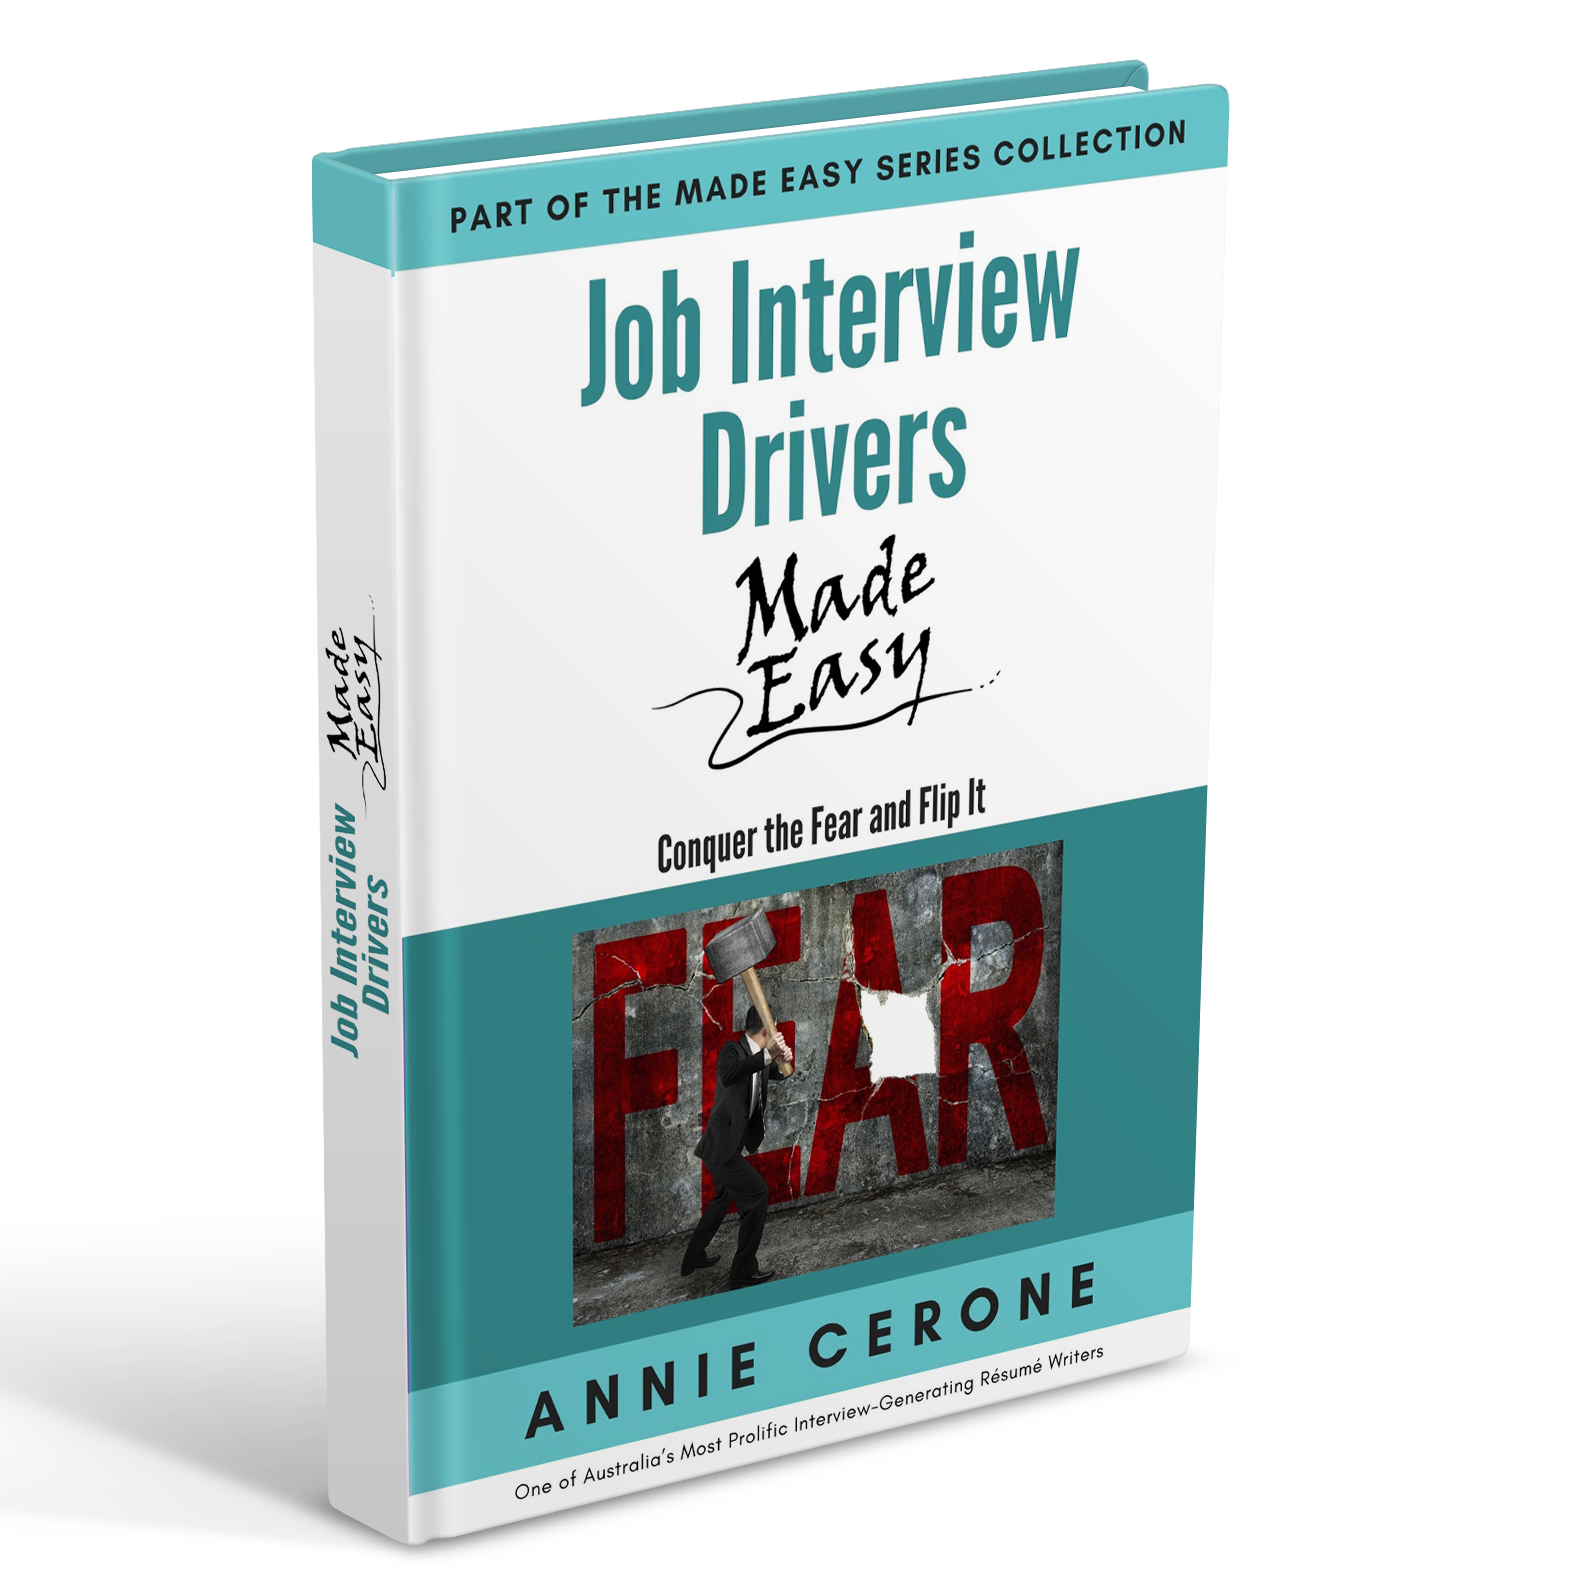 Job Interview Drivers Made Easy eBook: Conquer the fear and flip it